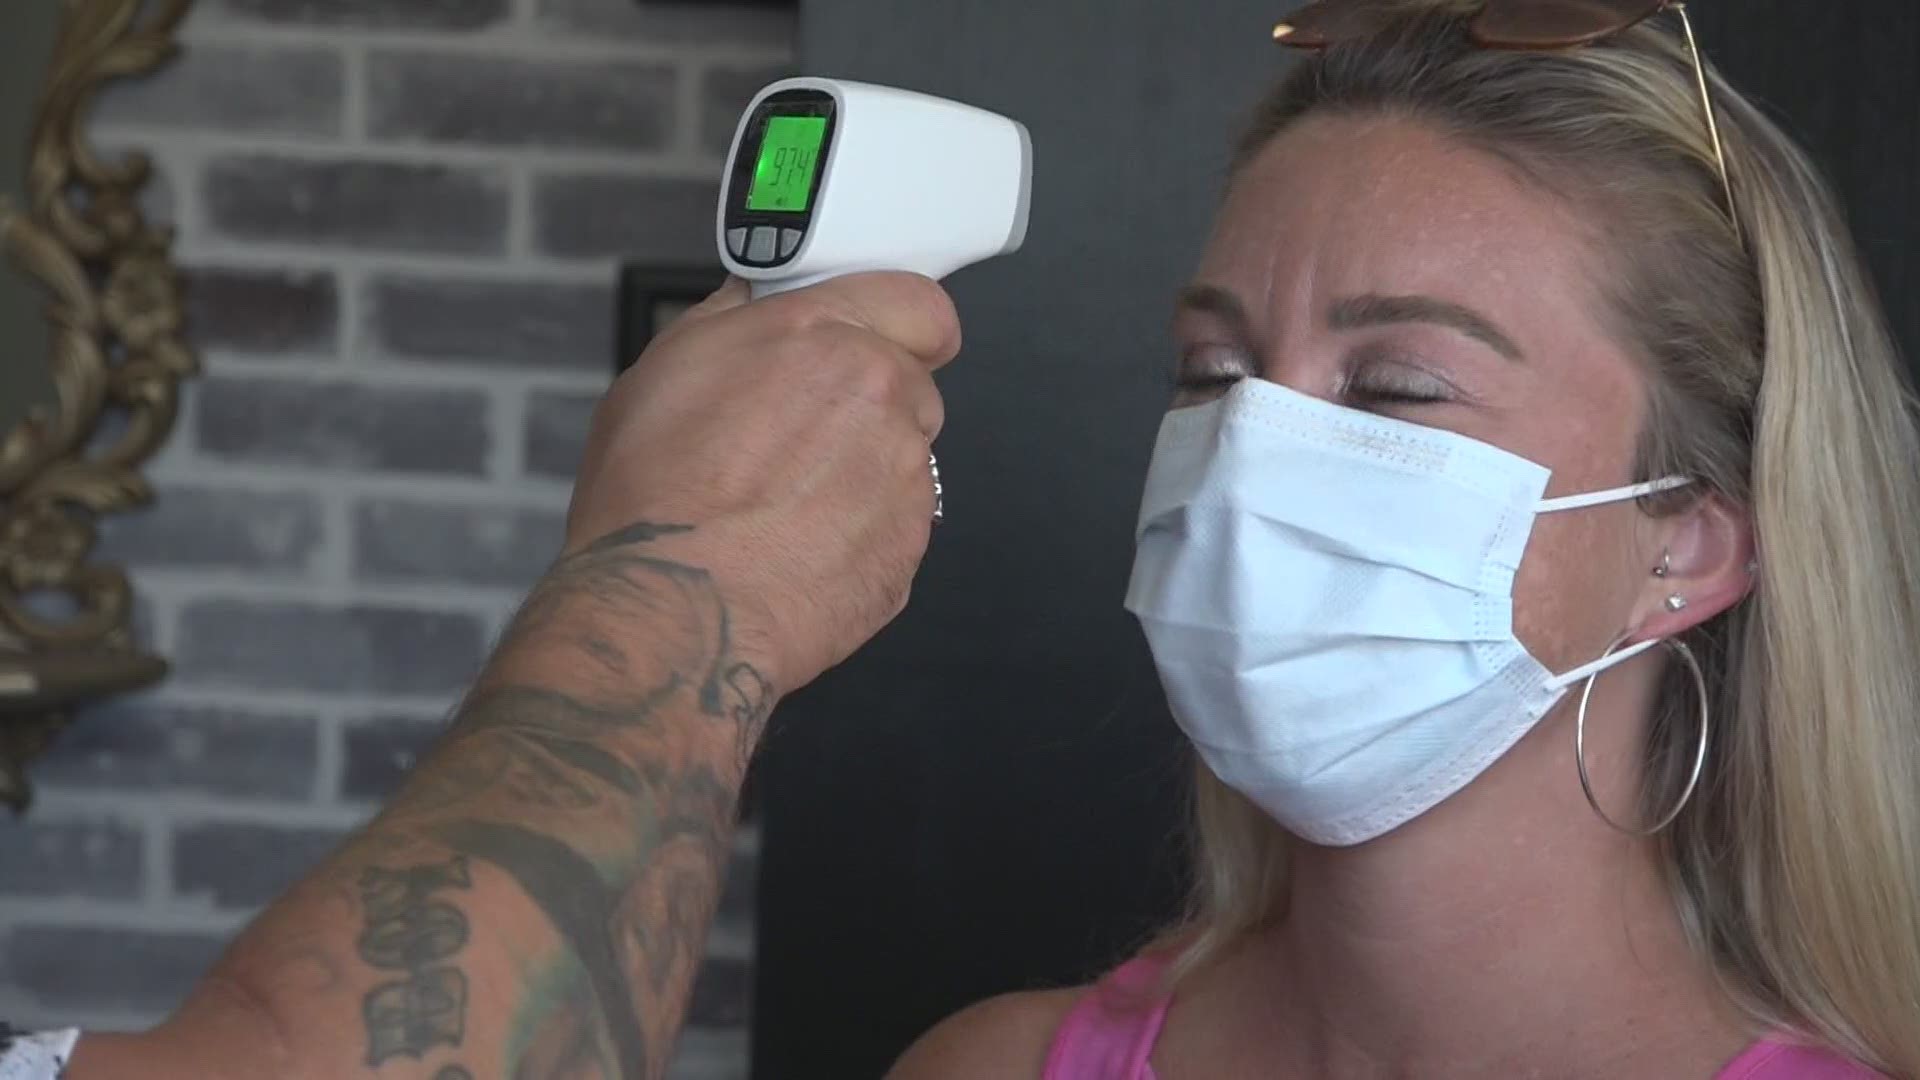 13 On Your Side's Alana Holland shows us another business ready to welcome back clients -- tattoo parlors.